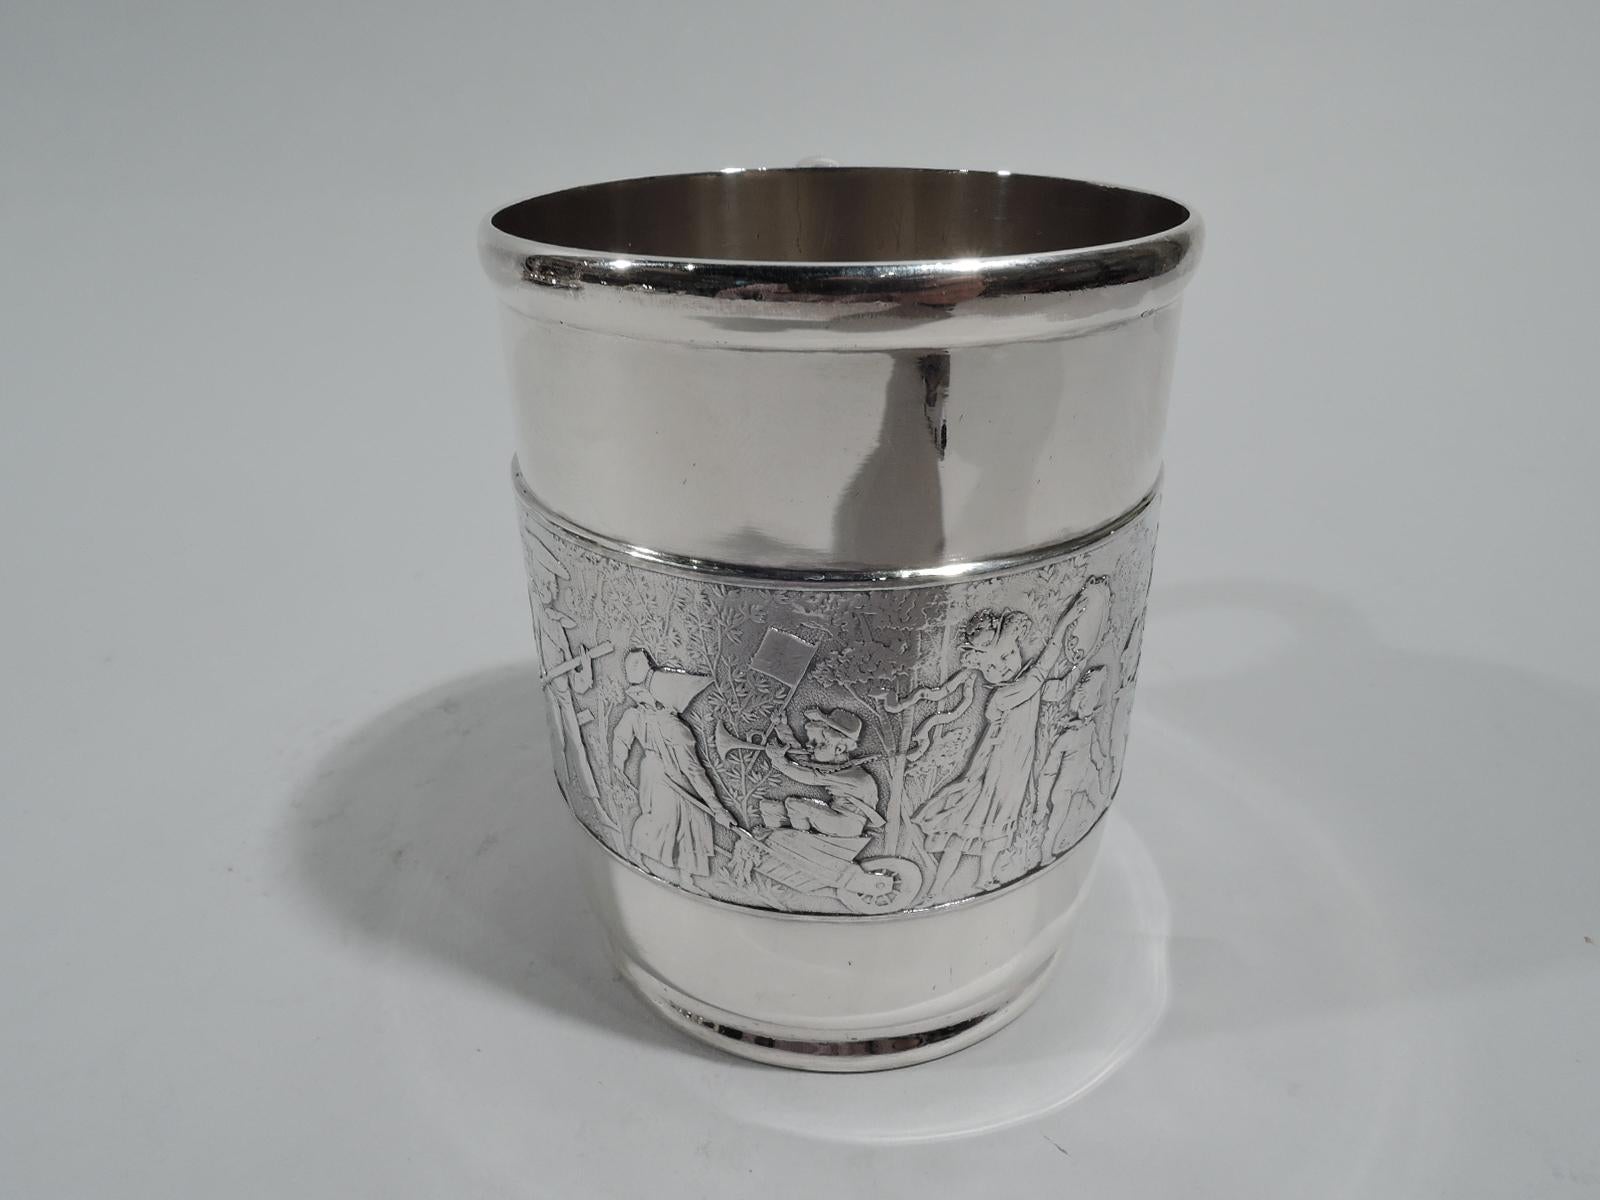 Victorian sterling silver baby cup. Made by Tiffany & Co. in New York. Straight sides and lobed c-scroll handle. Low-relief frieze of children’s parade—a boisterous procession of boys and girls blowing bugles, jangling tambourines, and beating